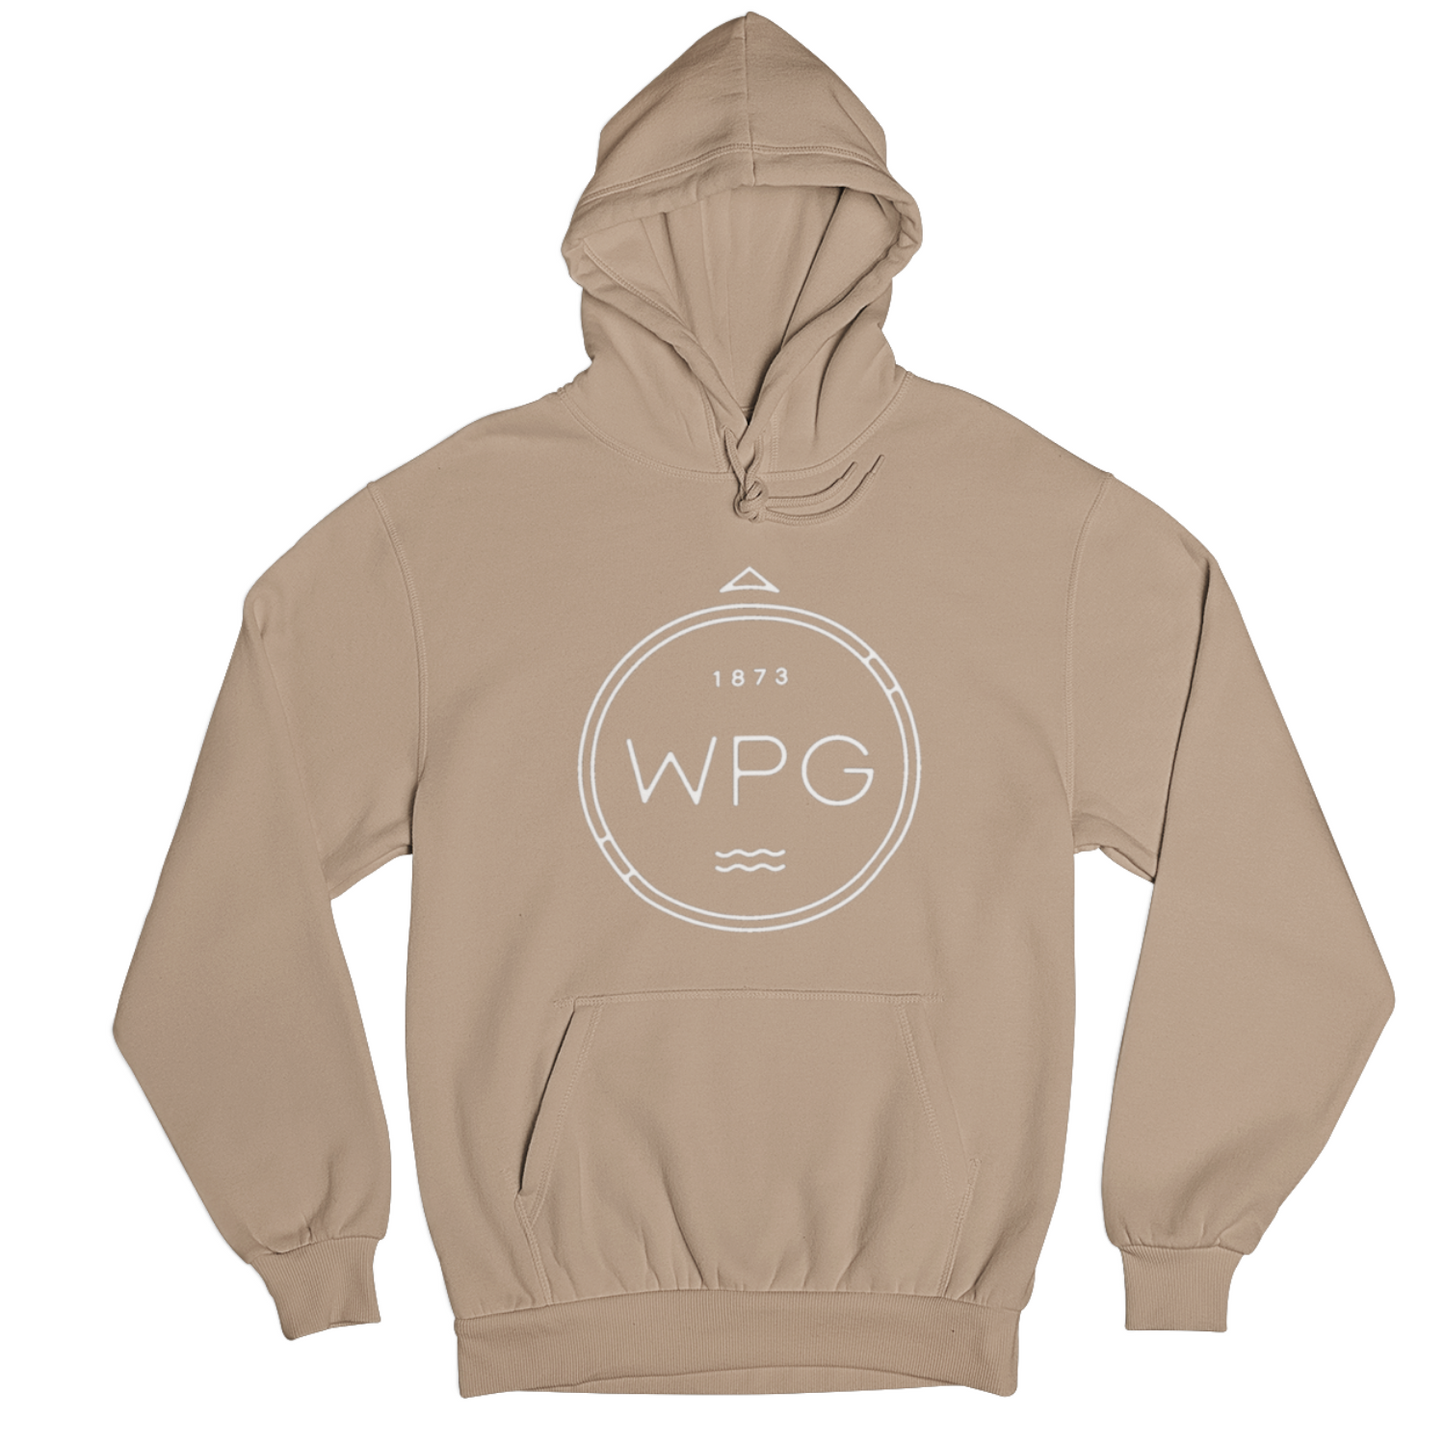 WPG Compass Hoodie | White on Sandstone